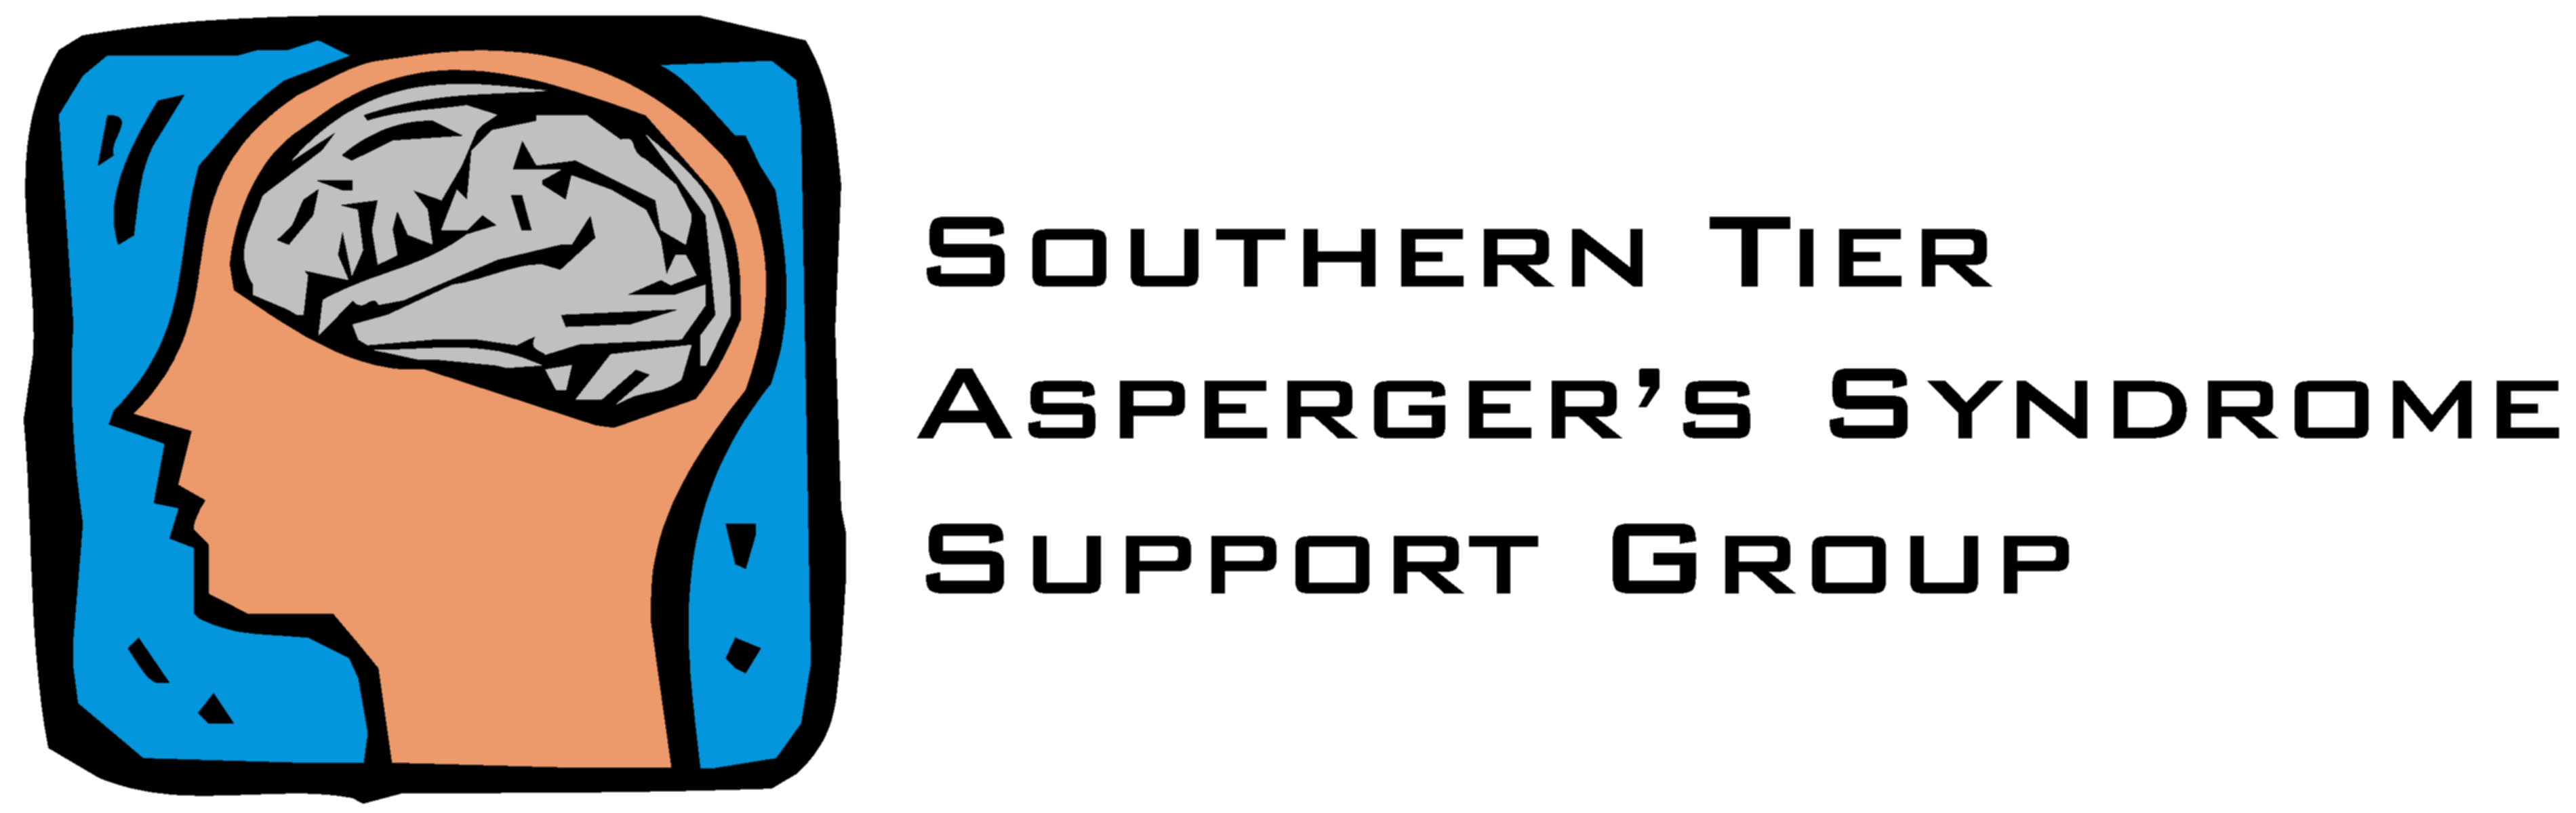 Southern Tier Asperger’s Syndrome Support Group